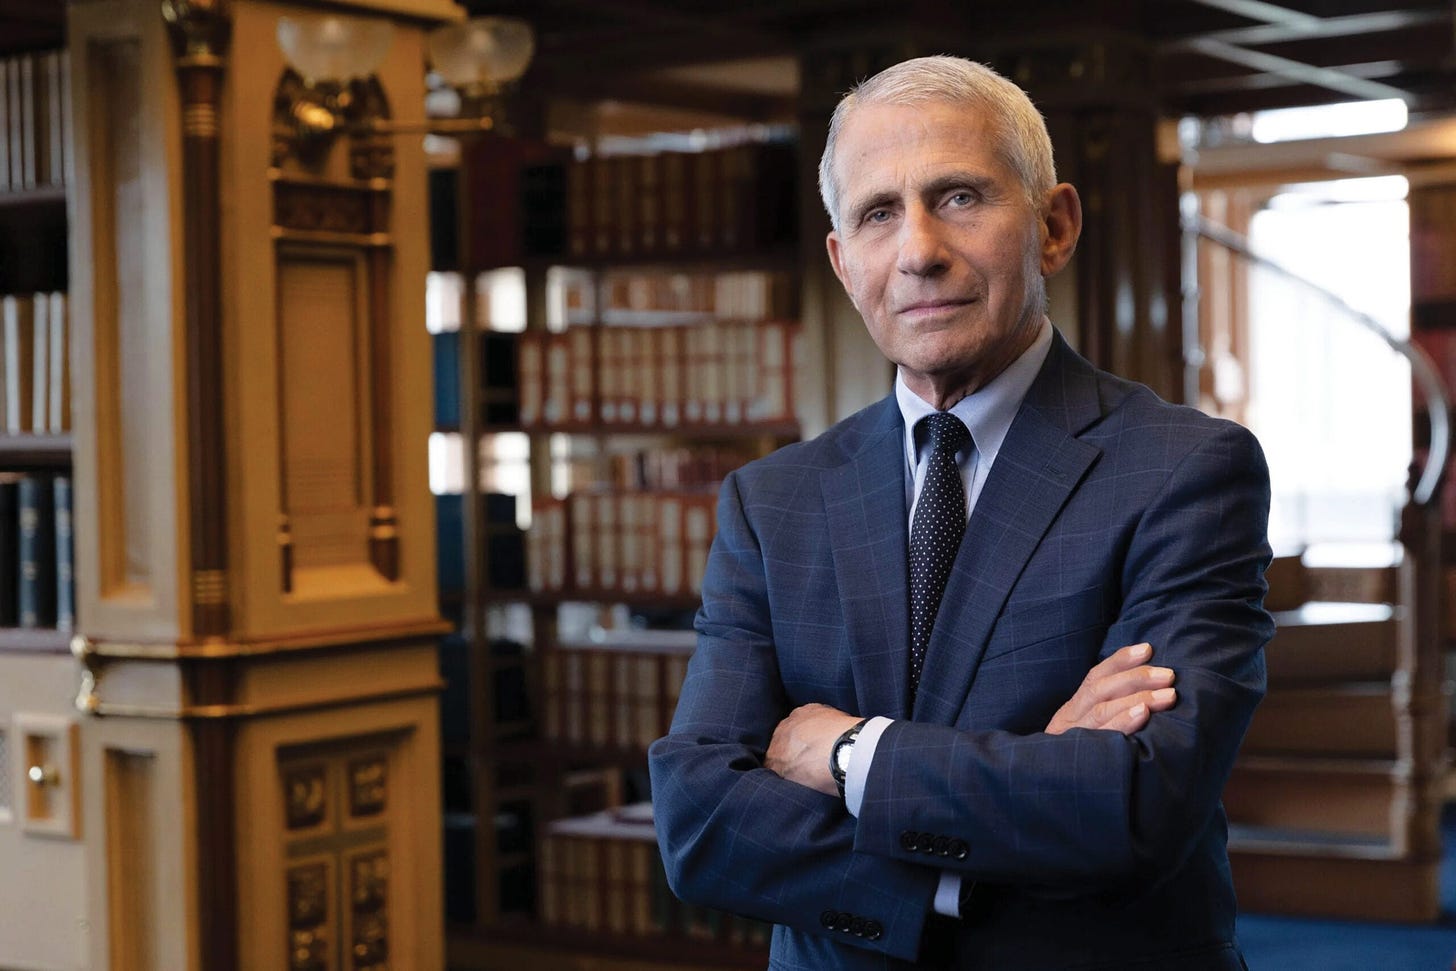 “We are deeply honored to welcome Dr. Anthony S. Fauci, a dedicated public servant, humanitarian, and visionary global health leader, to Georgetown...”